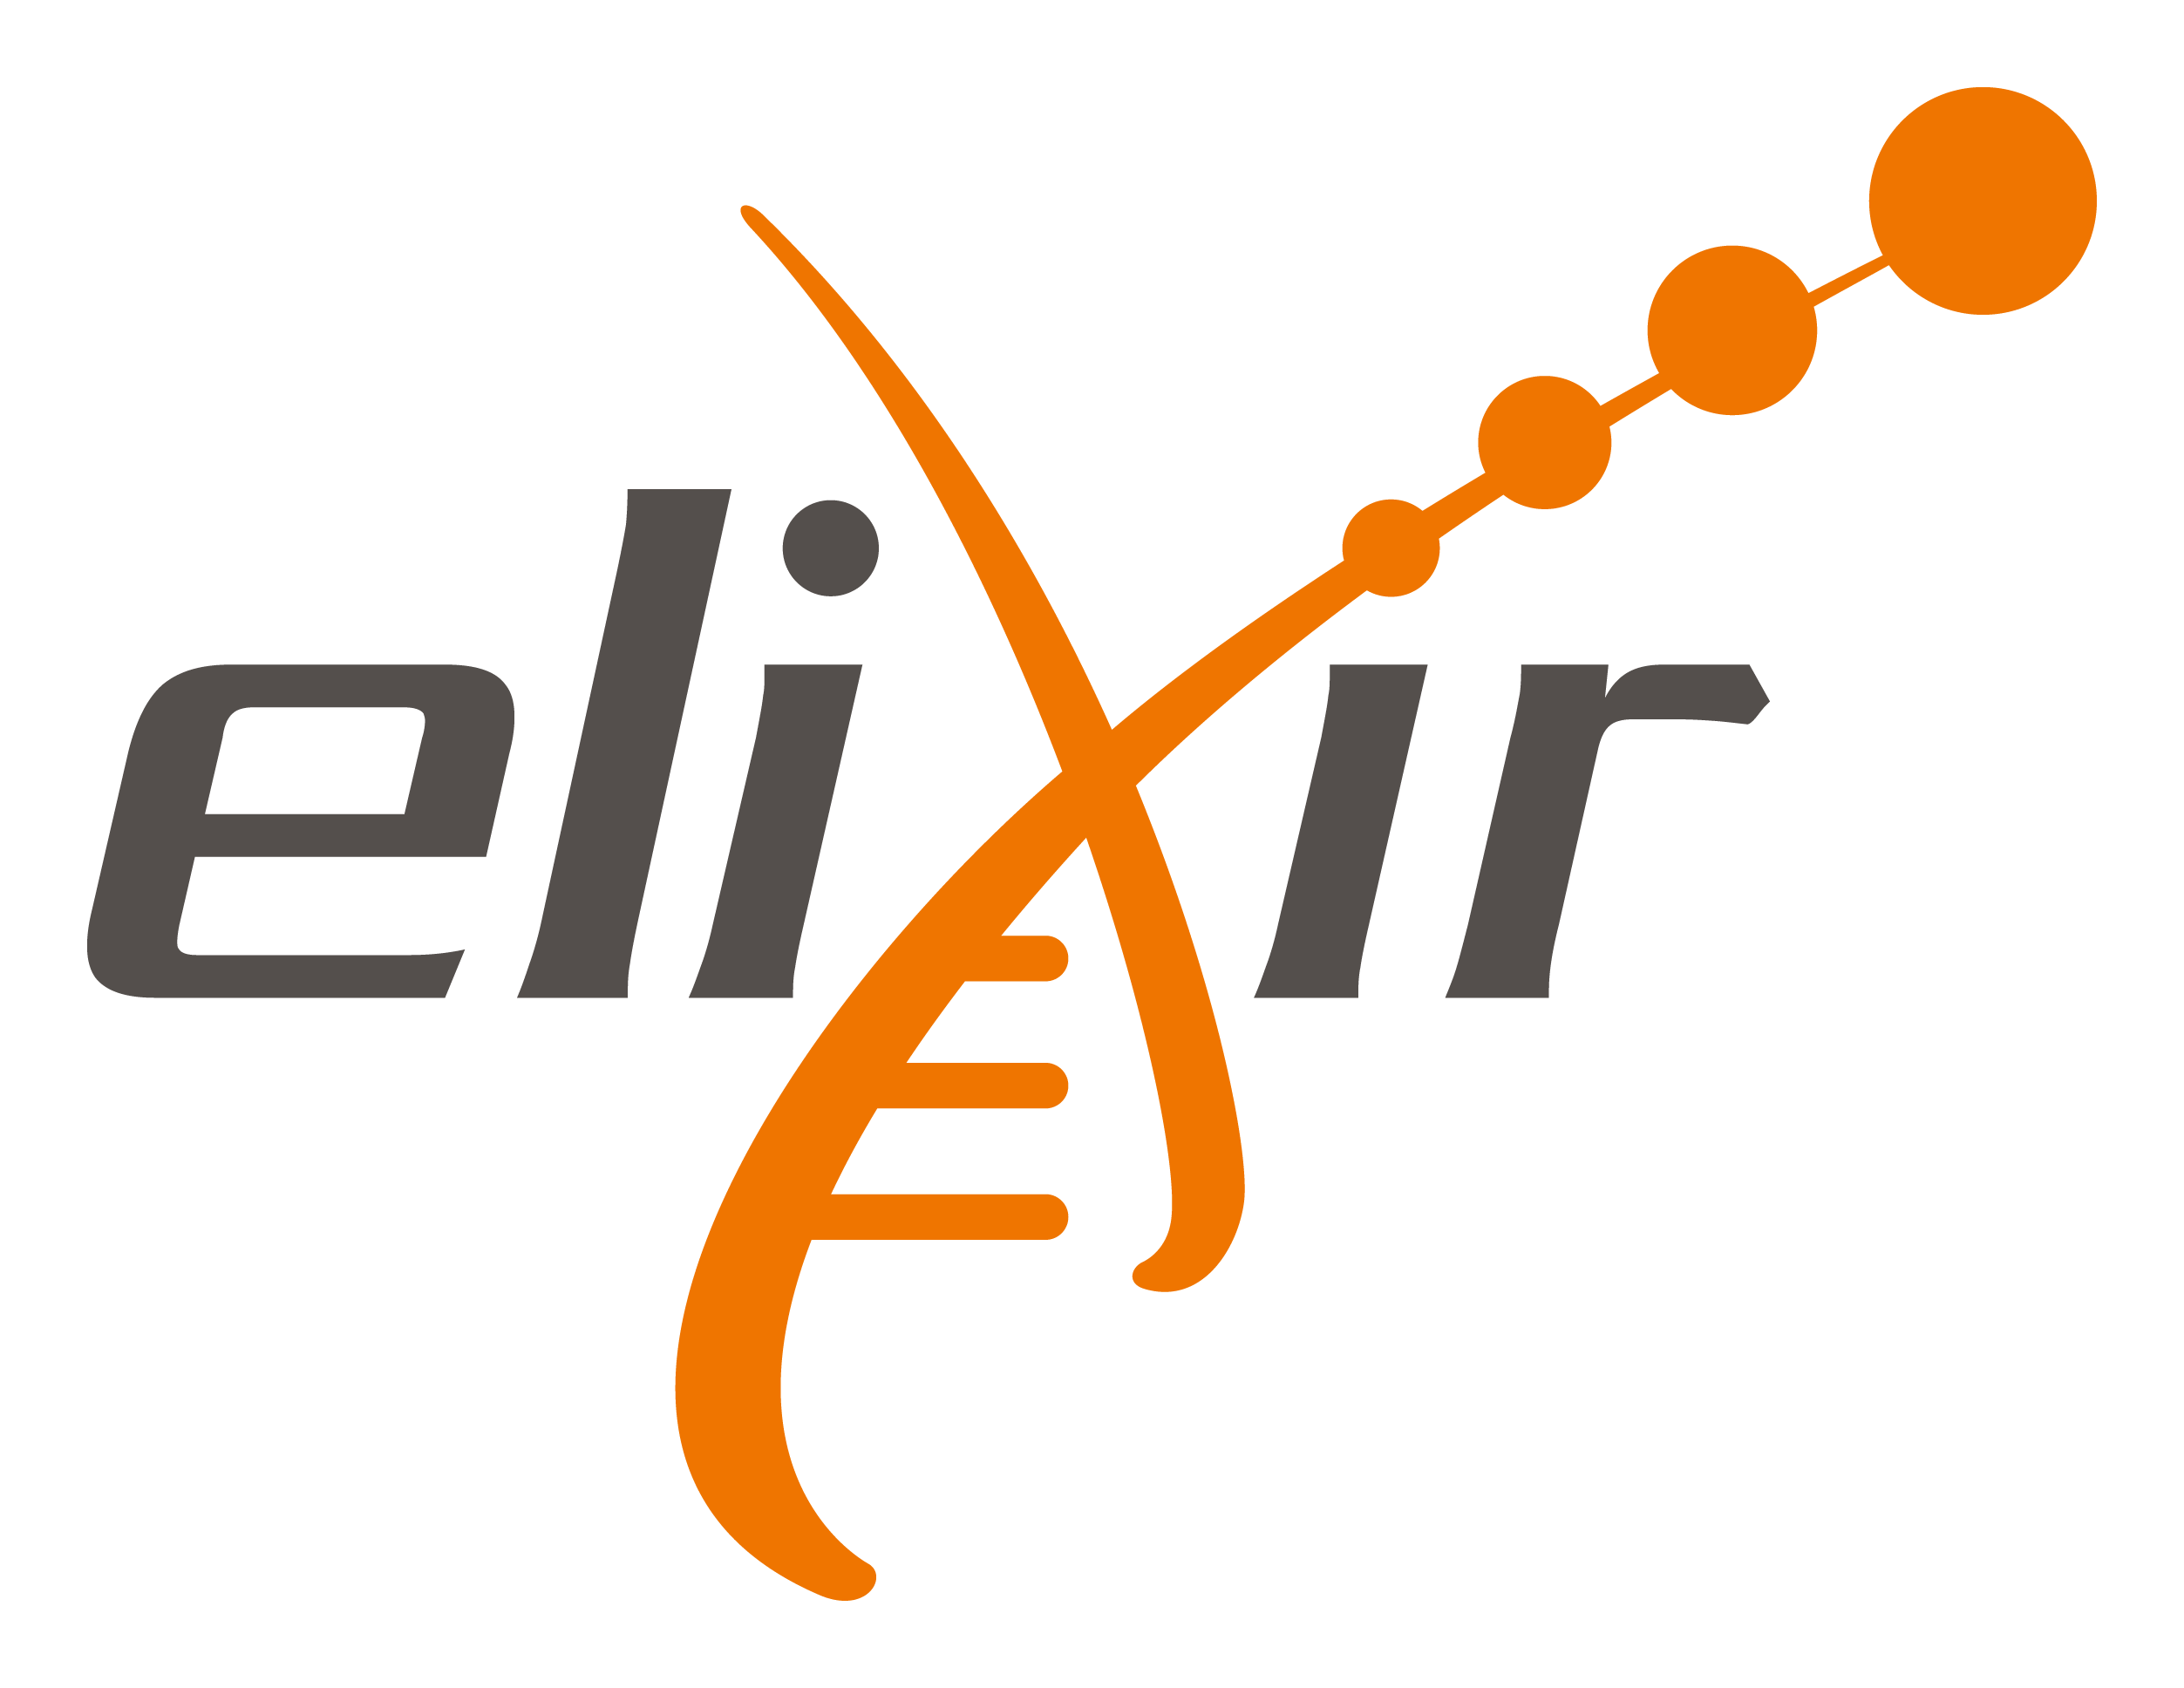 ELIXIR: uniting Europe’s leading life science organisations